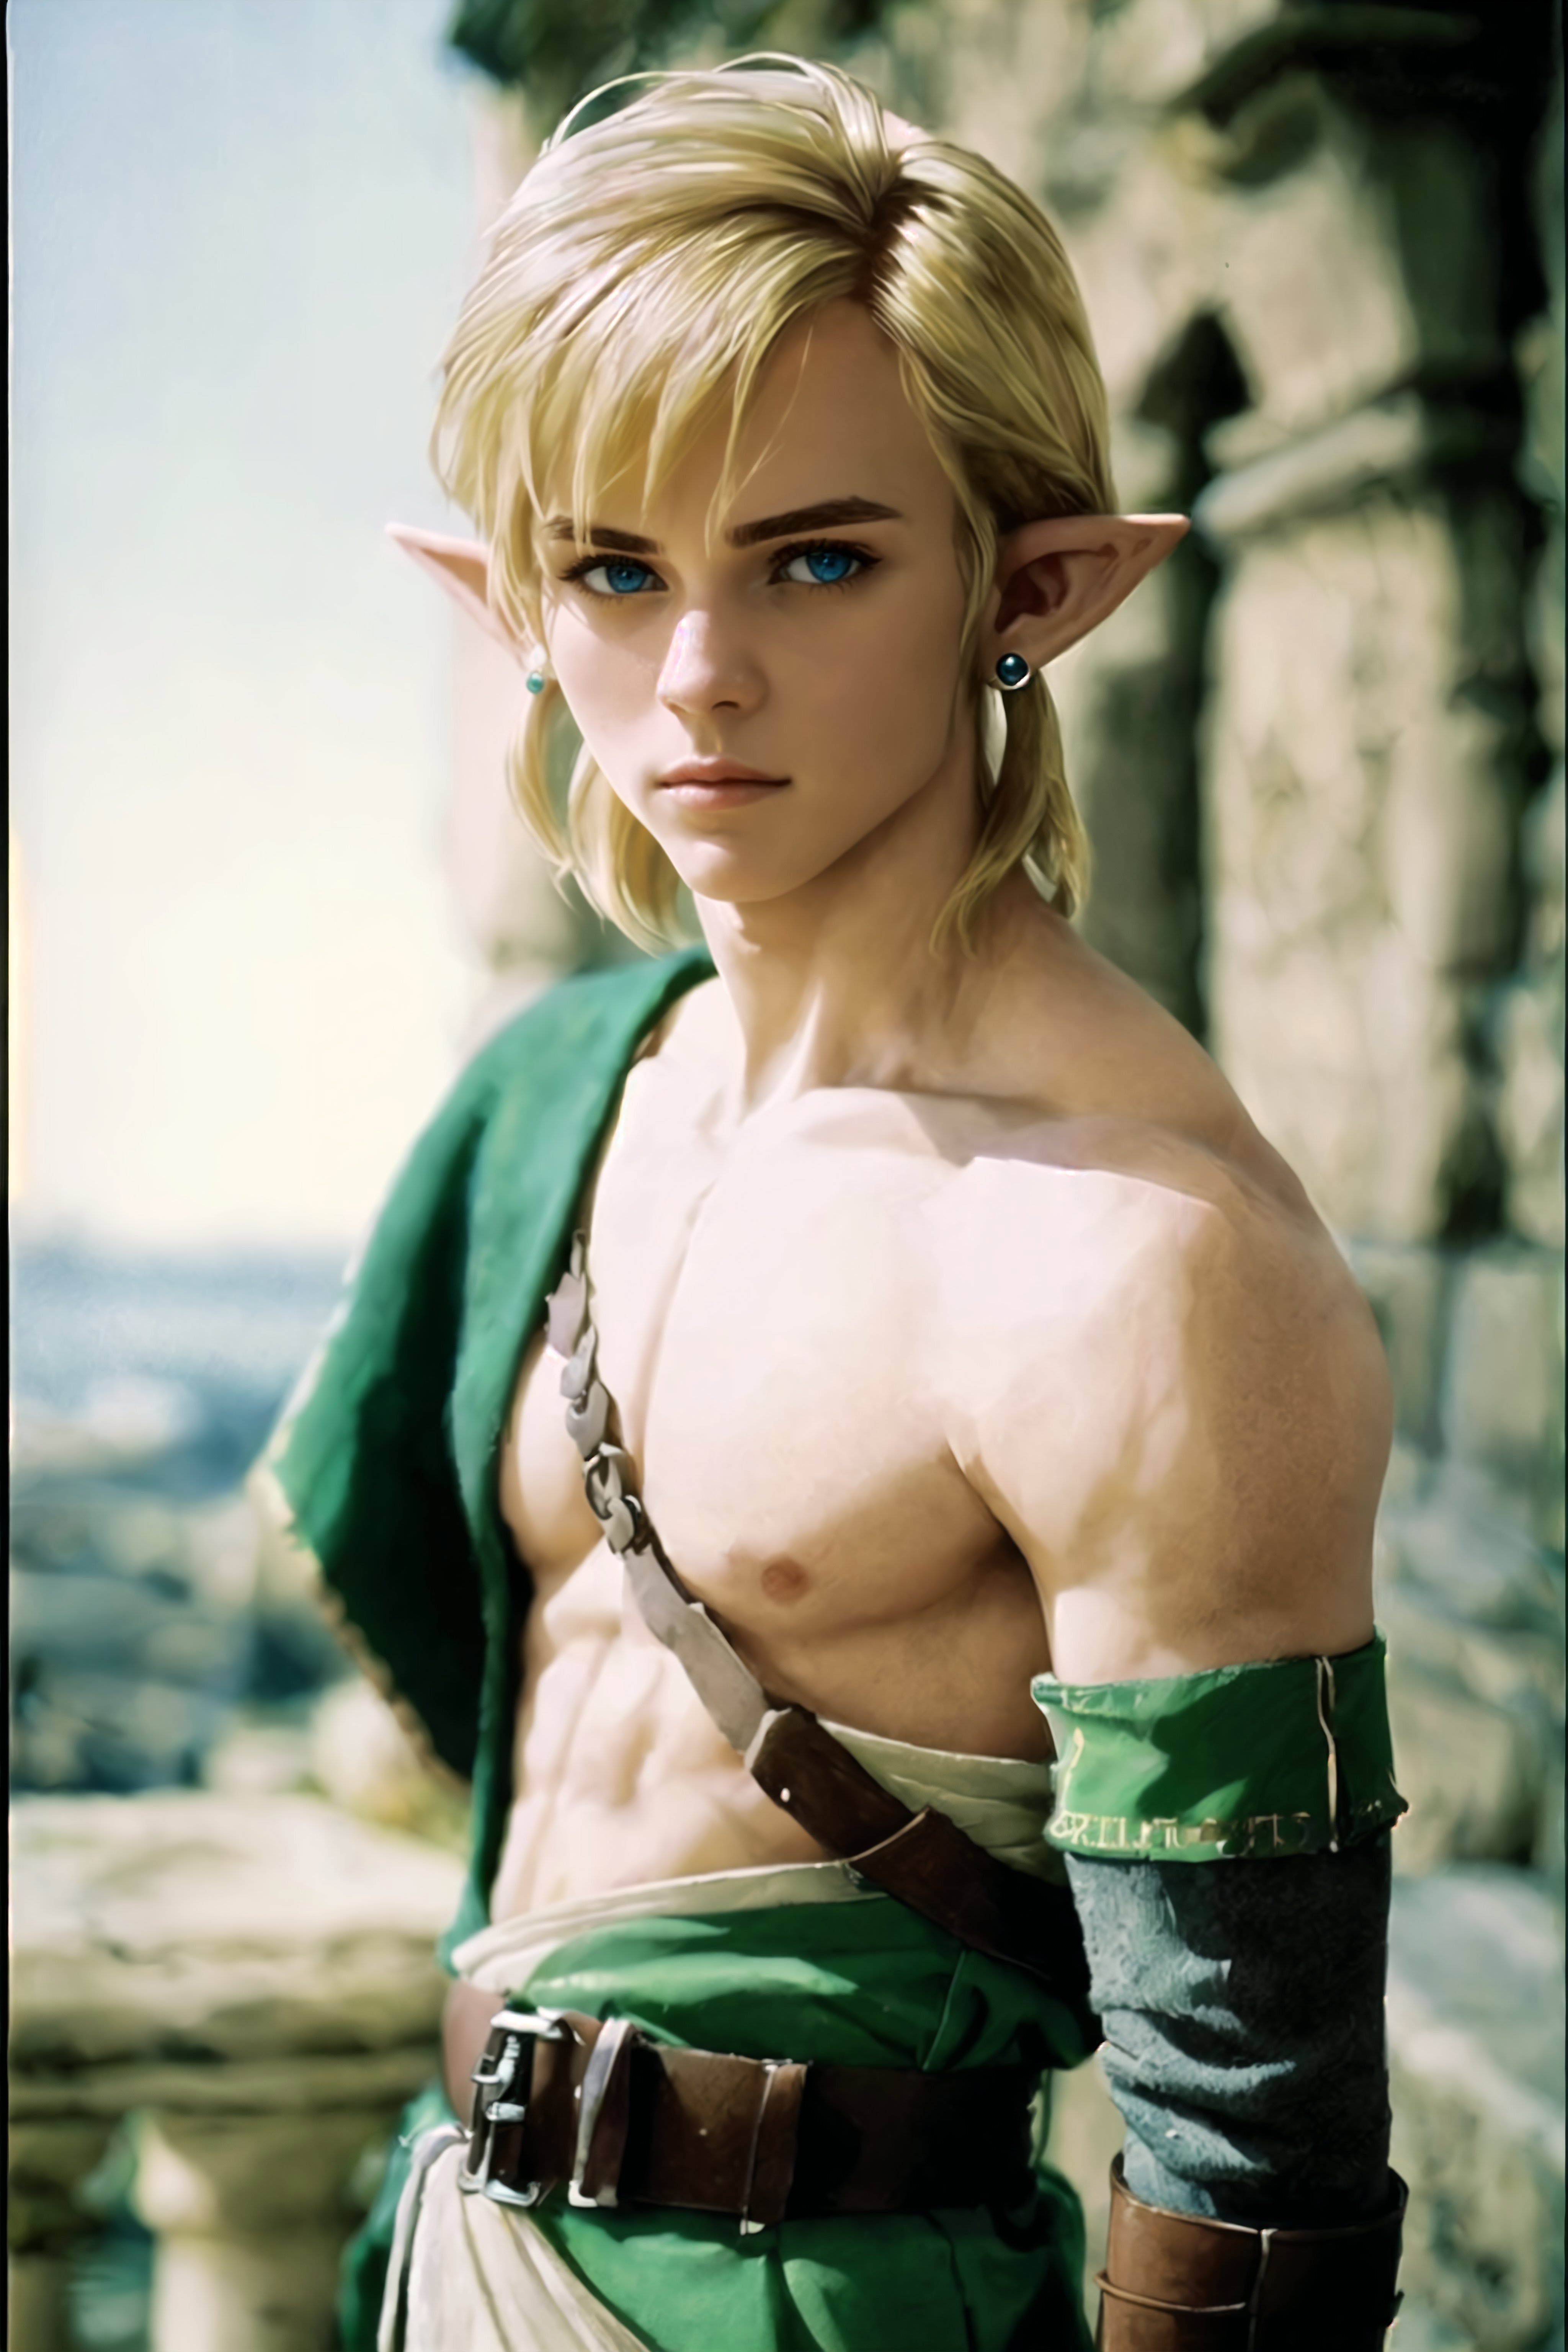 A shirtless man posing as Link from the Legend of Zelda series.